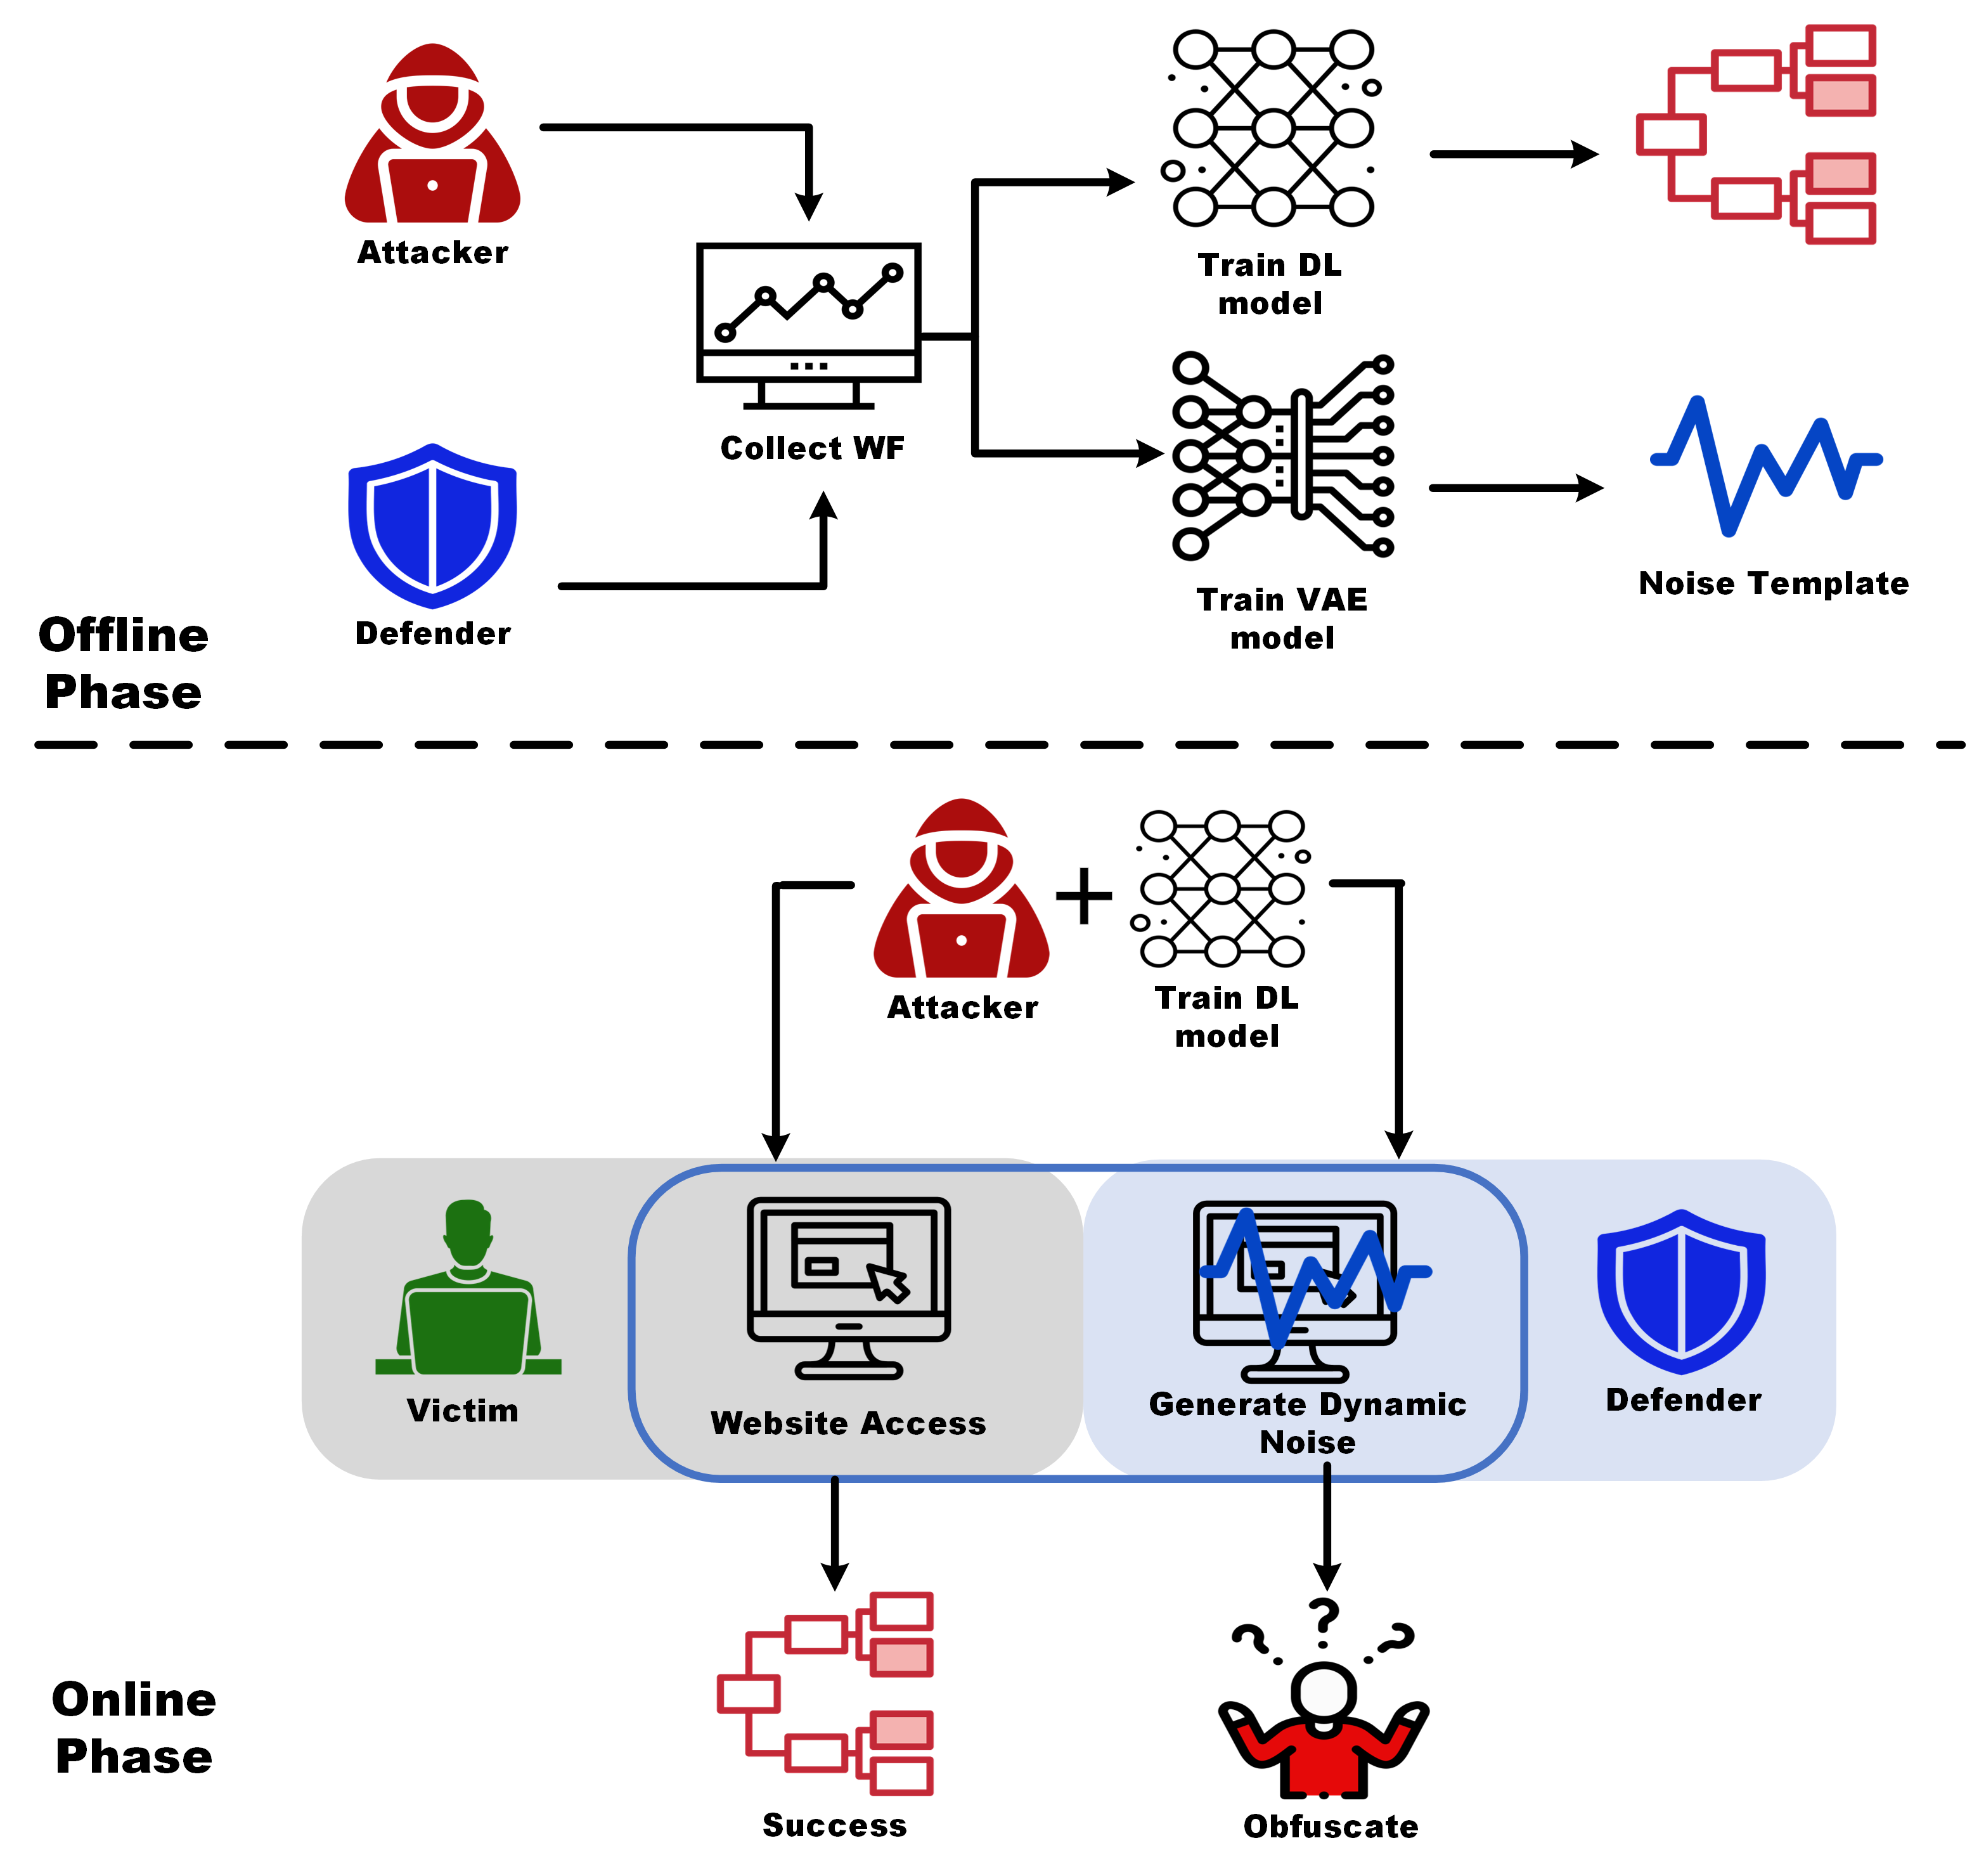 Threat model for the attacker and the defense mechanisms.